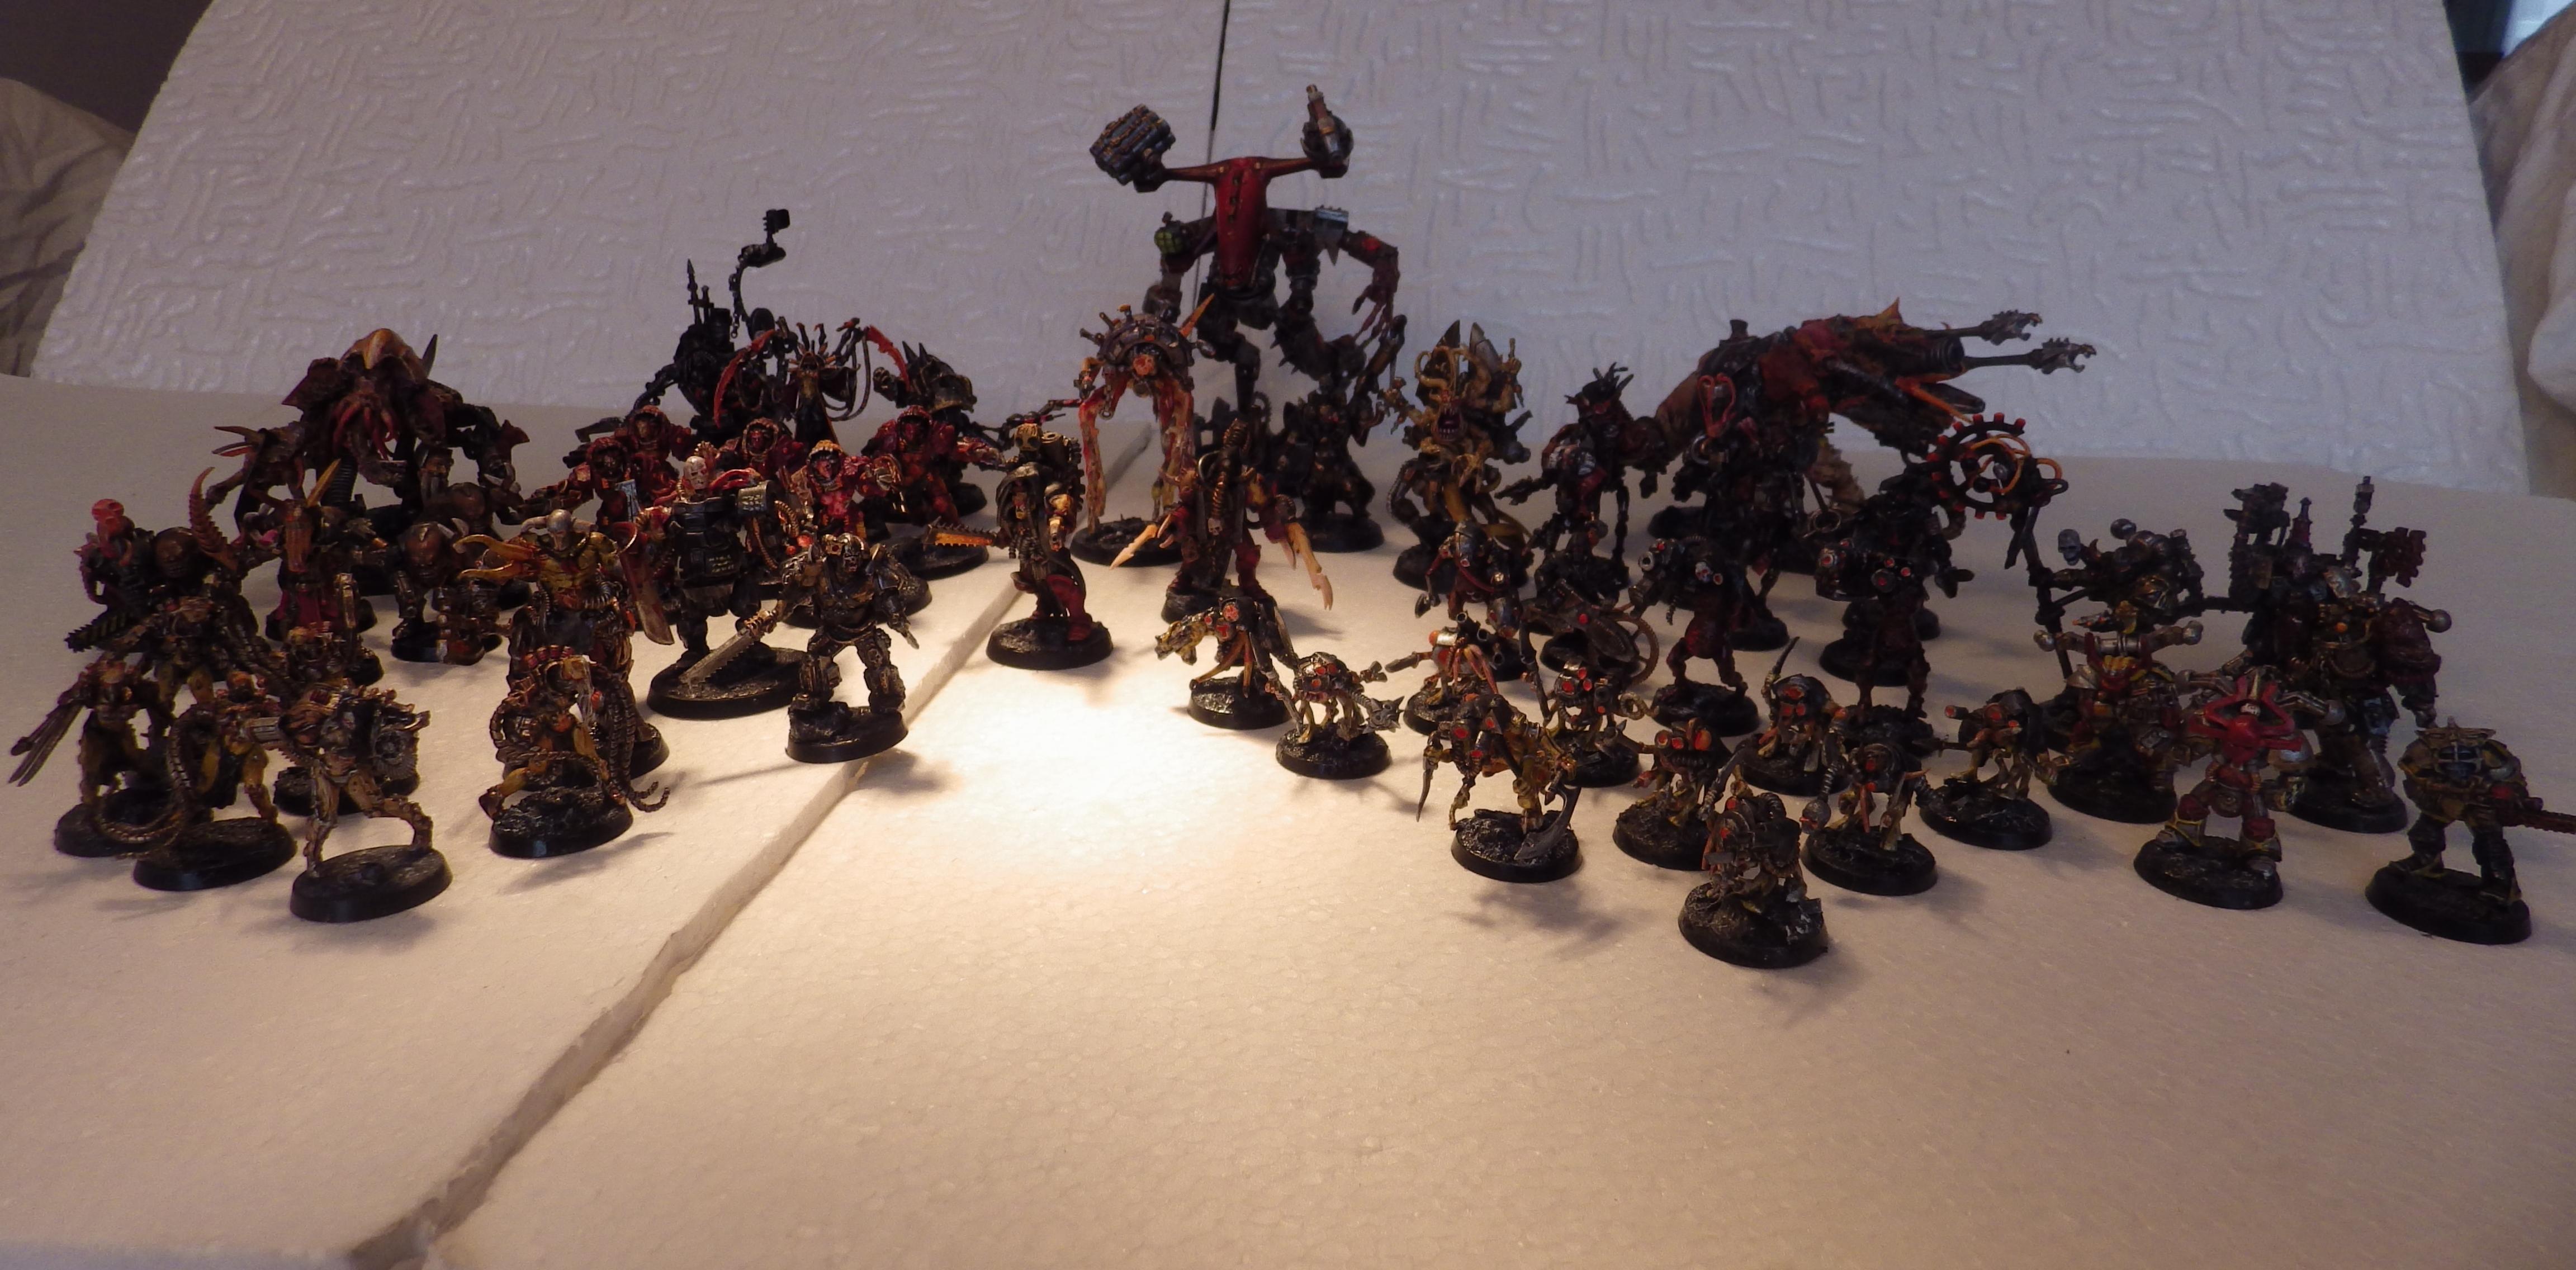 Army, Chaos, Chaos Space Marines, Conversion, Daemons